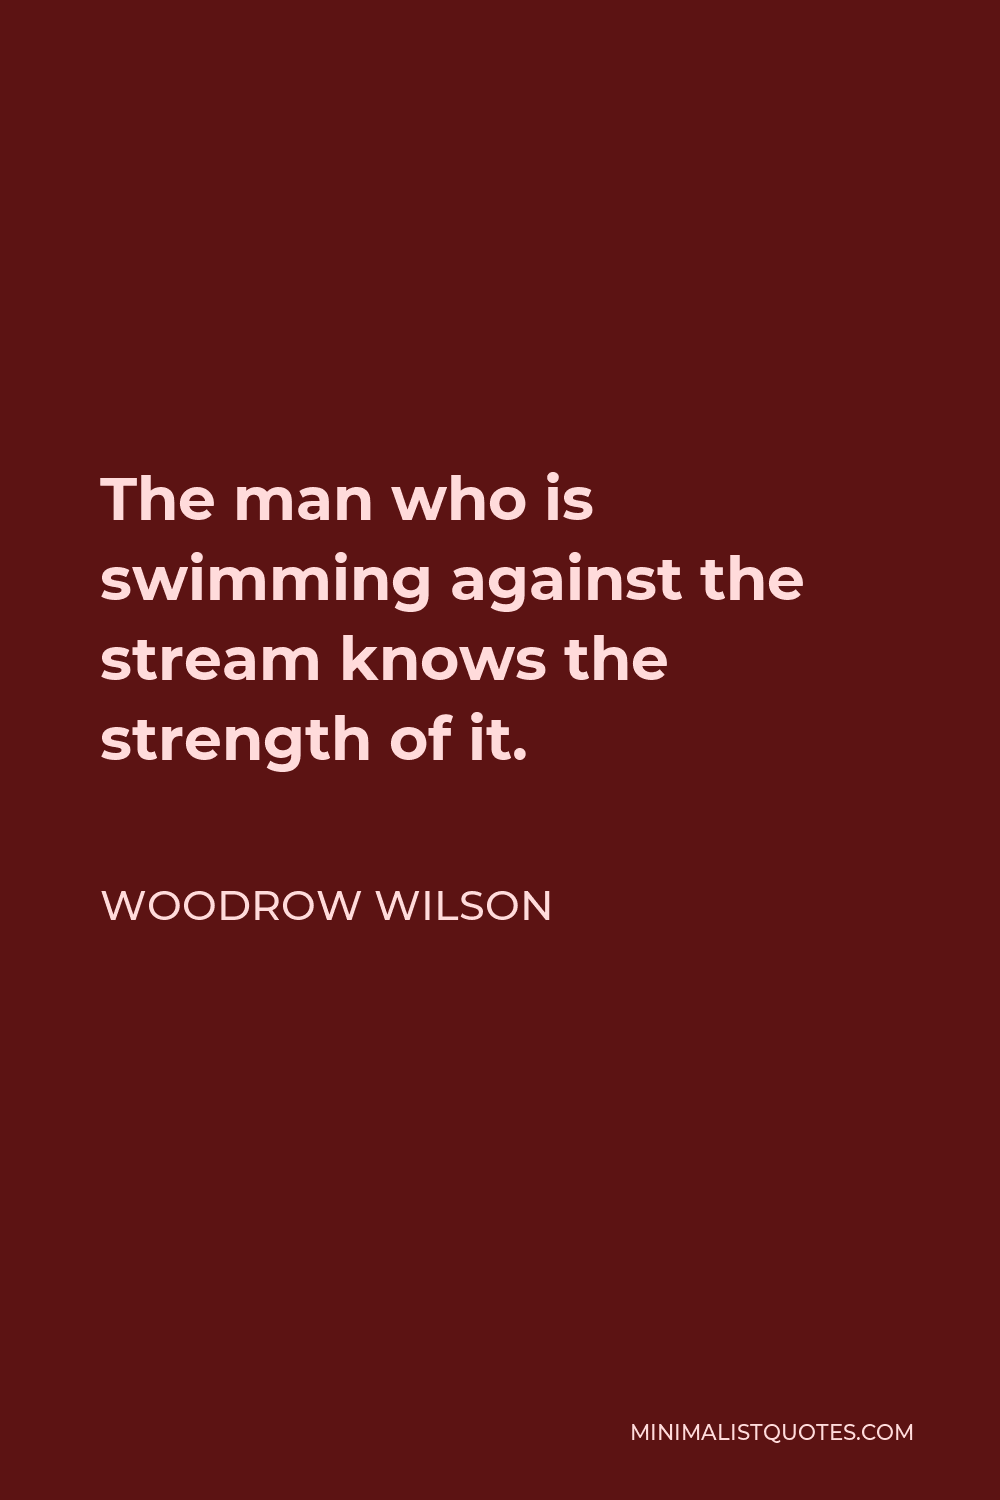 Woodrow Wilson Quote - The man who is swimming against the stream knows the strength of it.